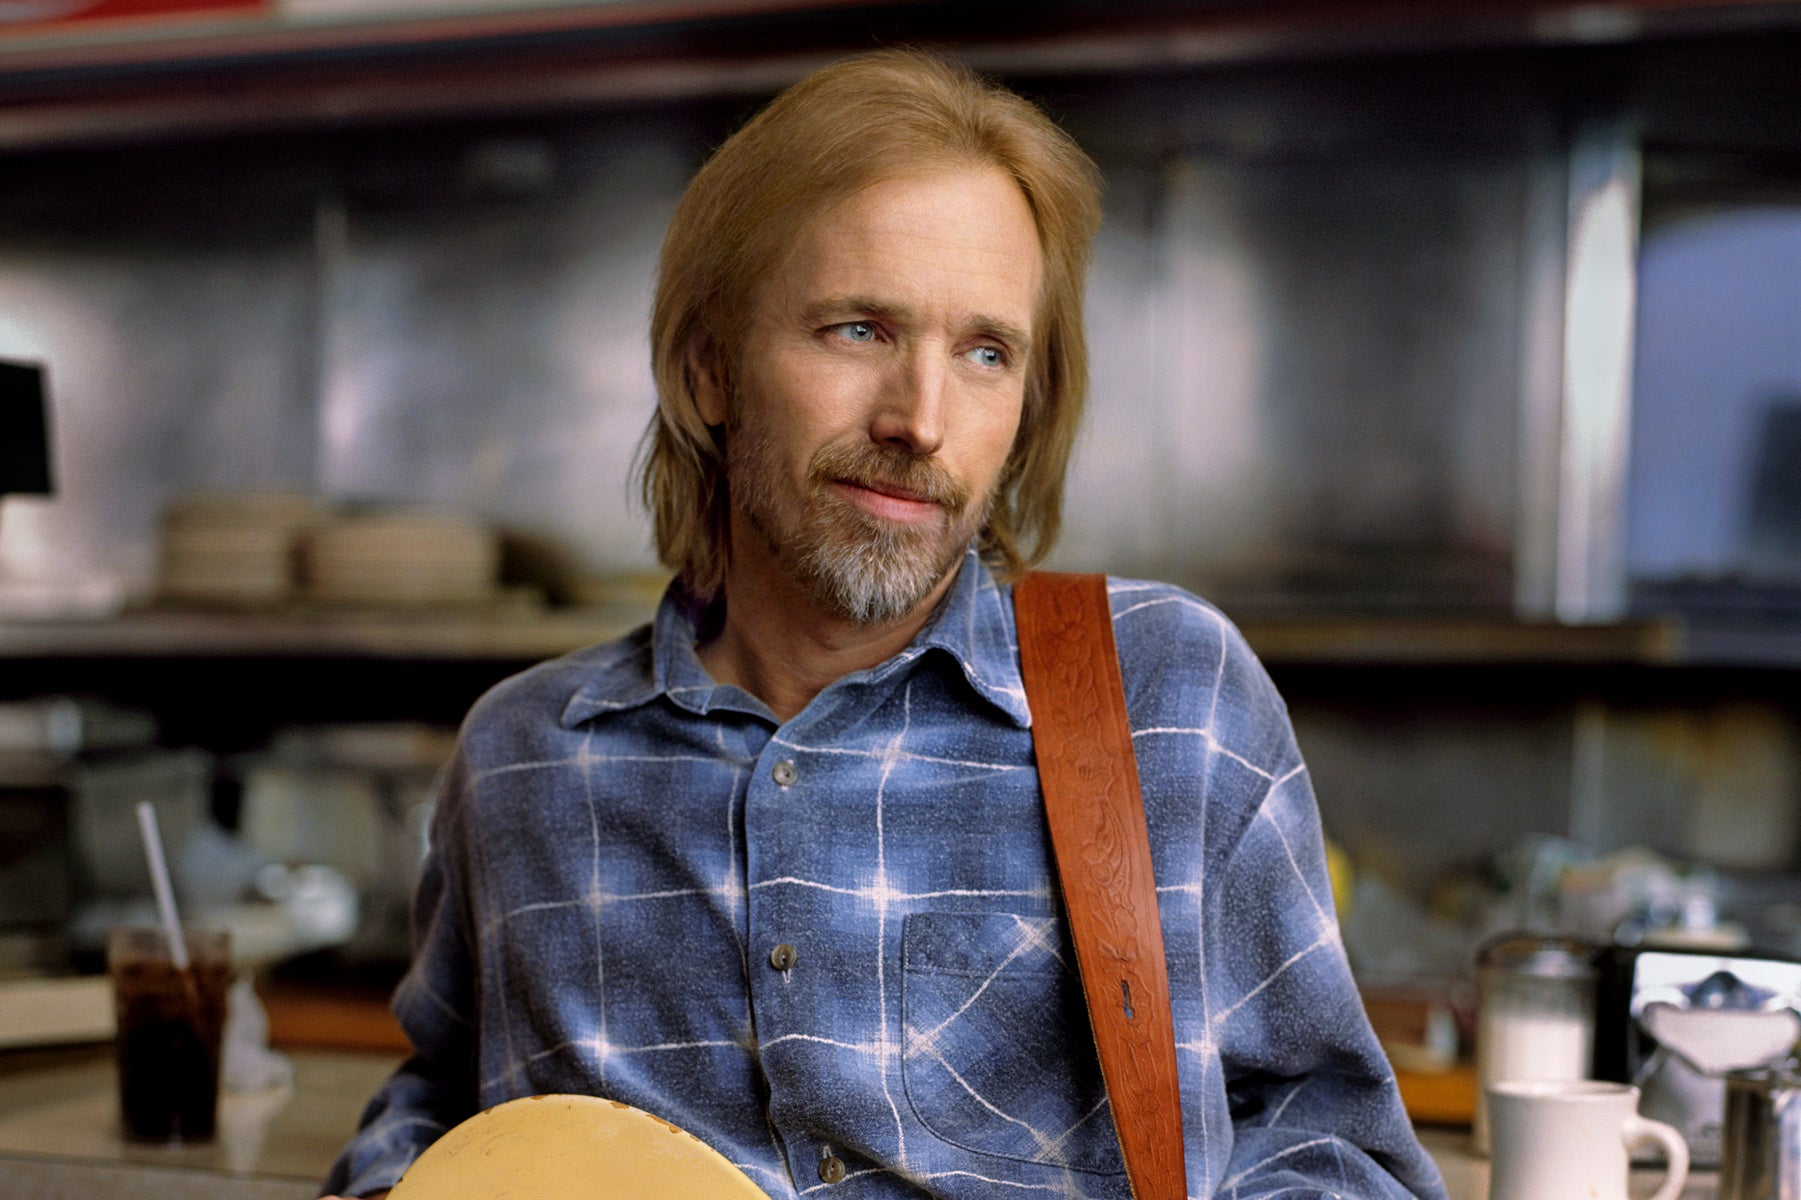 University Of Florida To Honor Tom Petty With Posthumous PhD In Music